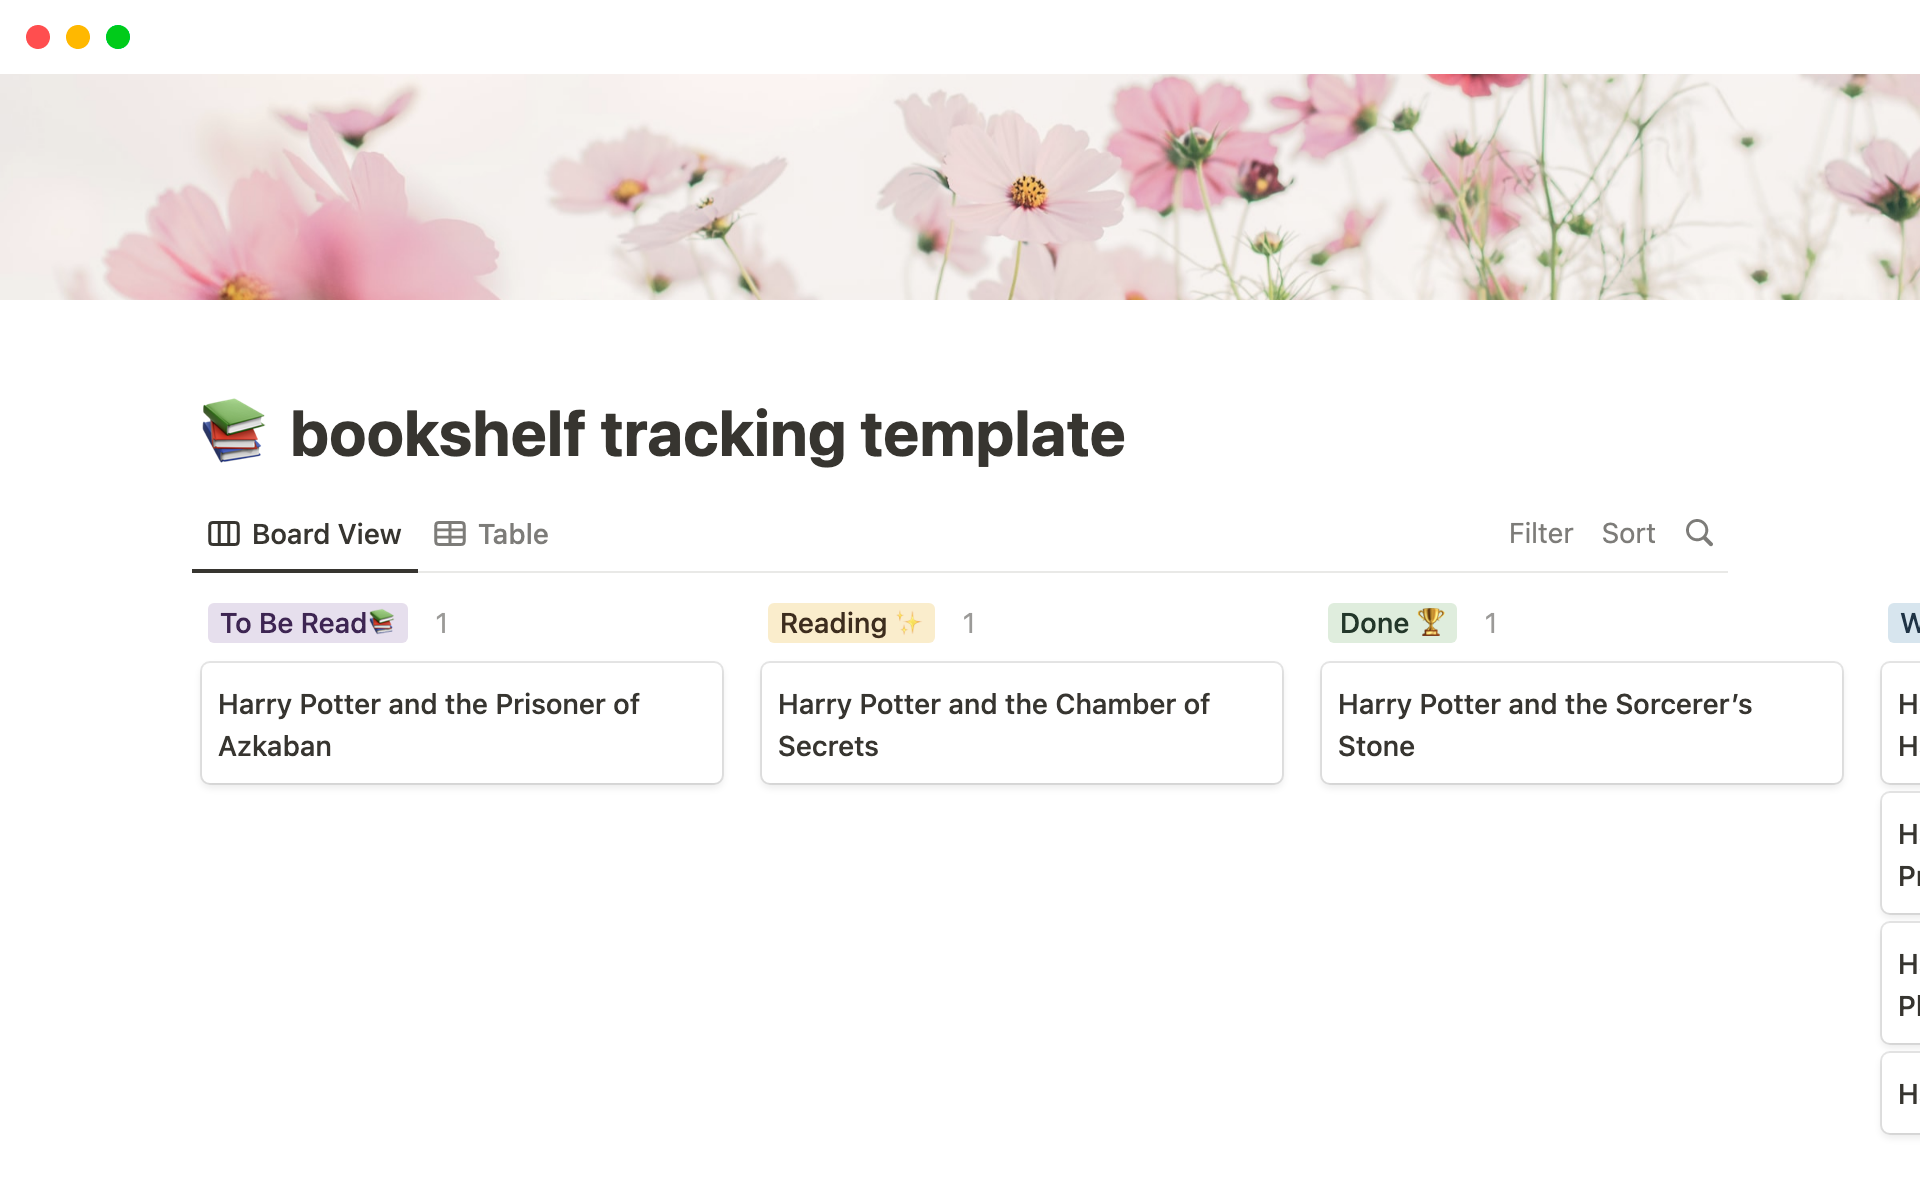 Tracking/cataloging template for a book collection.